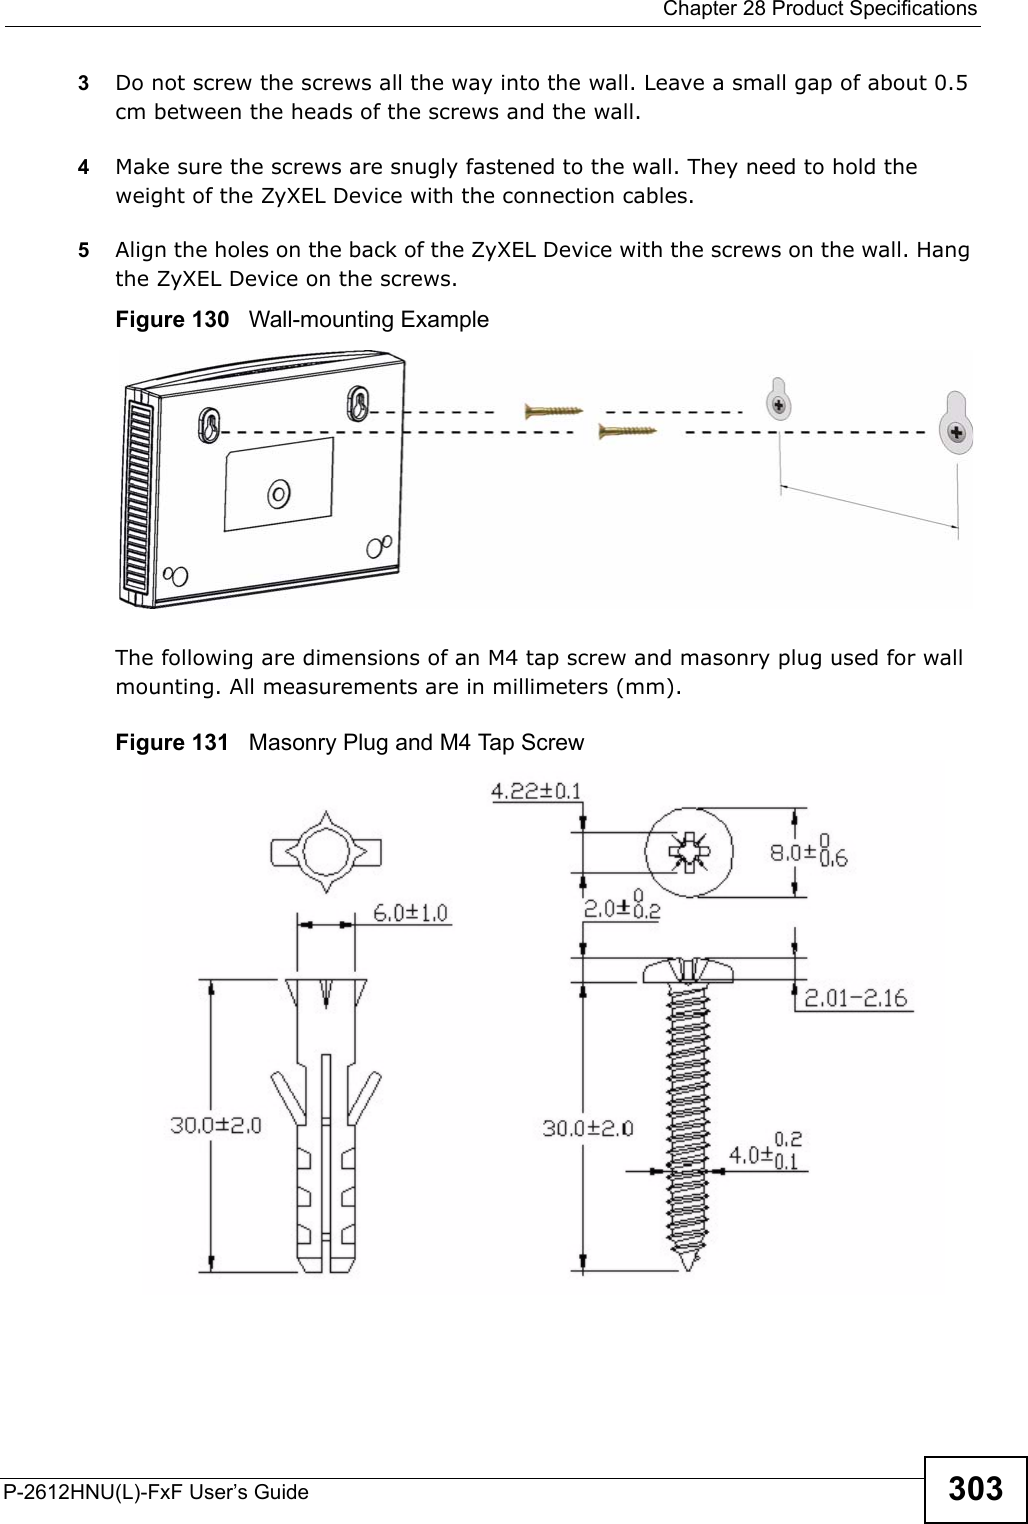  Chapter 28 Product SpecificationsP-2612HNU(L)-FxF User’s Guide 3033Do not screw the screws all the way into the wall. Leave a small gap of about 0.5 cm between the heads of the screws and the wall. 4Make sure the screws are snugly fastened to the wall. They need to hold the weight of the ZyXEL Device with the connection cables. 5Align the holes on the back of the ZyXEL Device with the screws on the wall. Hangthe ZyXEL Device on the screws.Figure 130   Wall-mounting ExampleThe following are dimensions of an M4 tap screw and masonry plug used for wallmounting. All measurements are in millimeters (mm). Figure 131   Masonry Plug and M4 Tap Screw